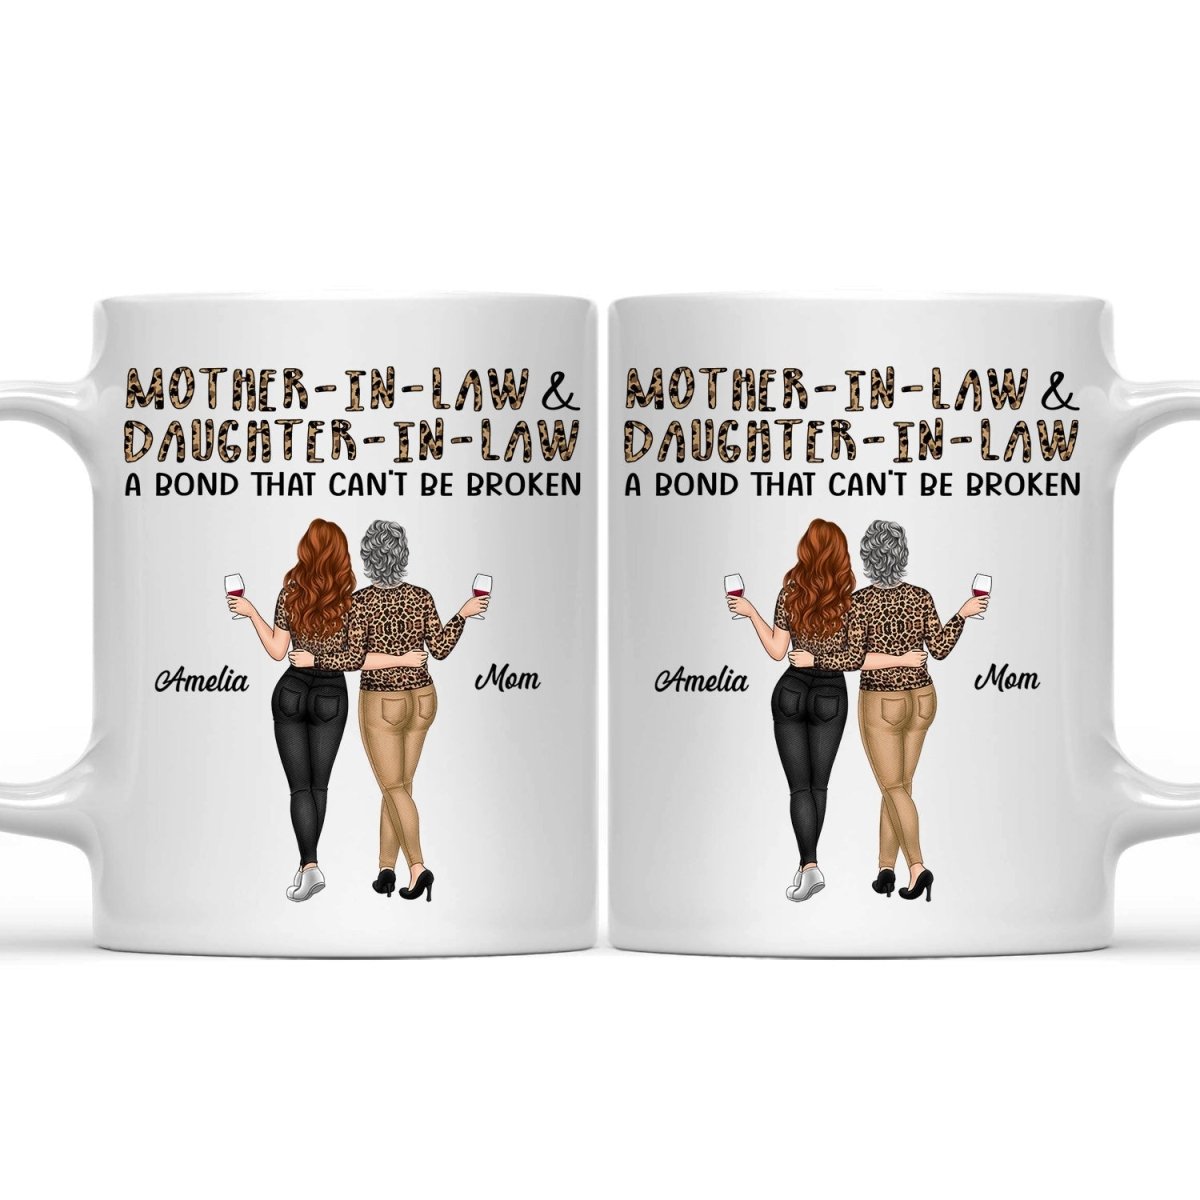 Family - Mother - In - Law & Daughter - In - Law A Bond That Can't Be Broken - Personalized Mug - The Next Custom Gift